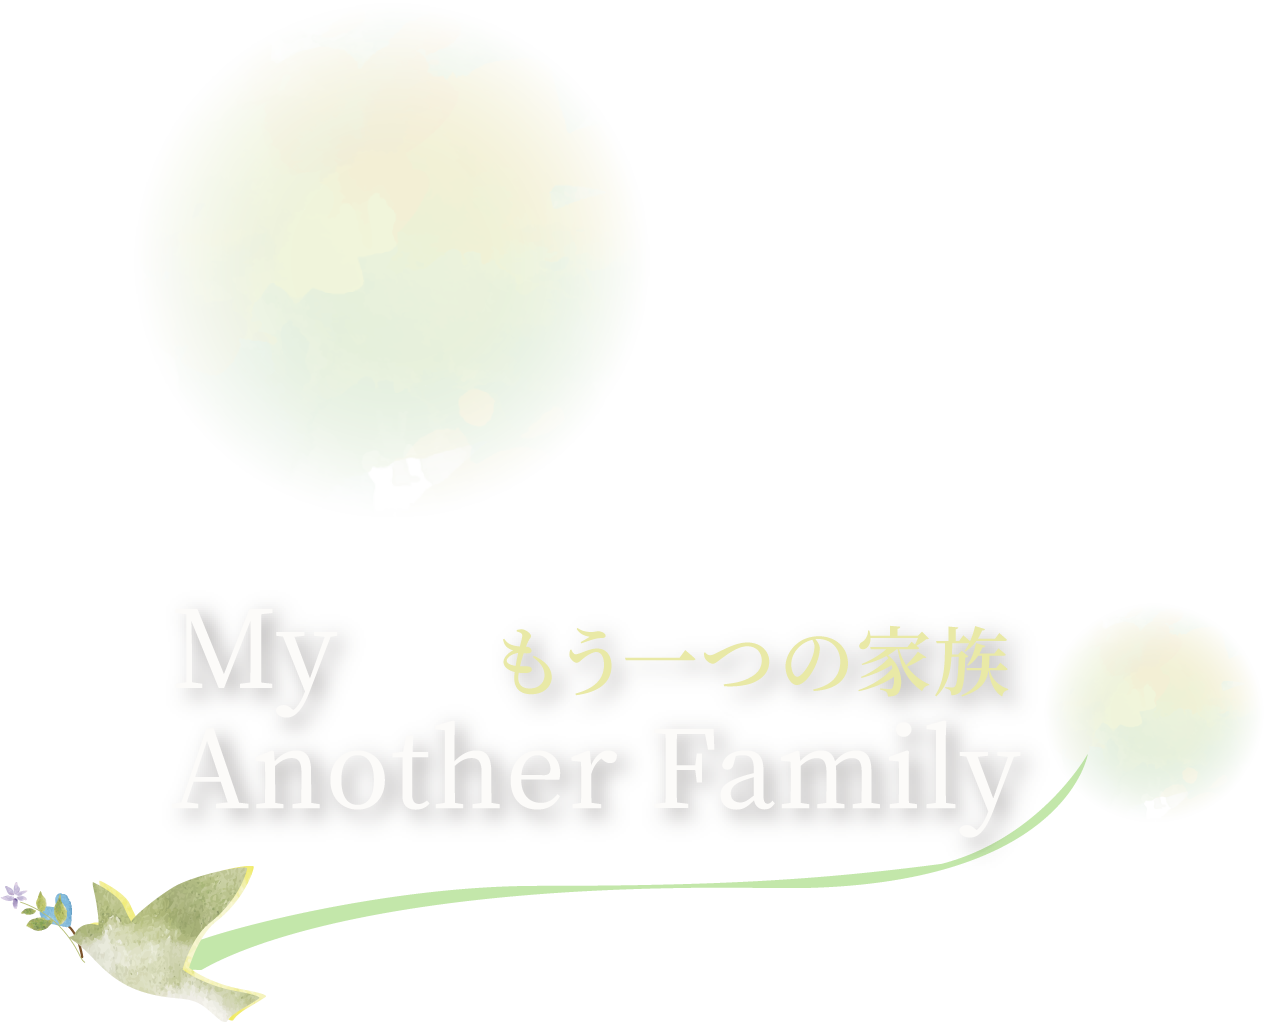 My Another Family もうひとつの家族